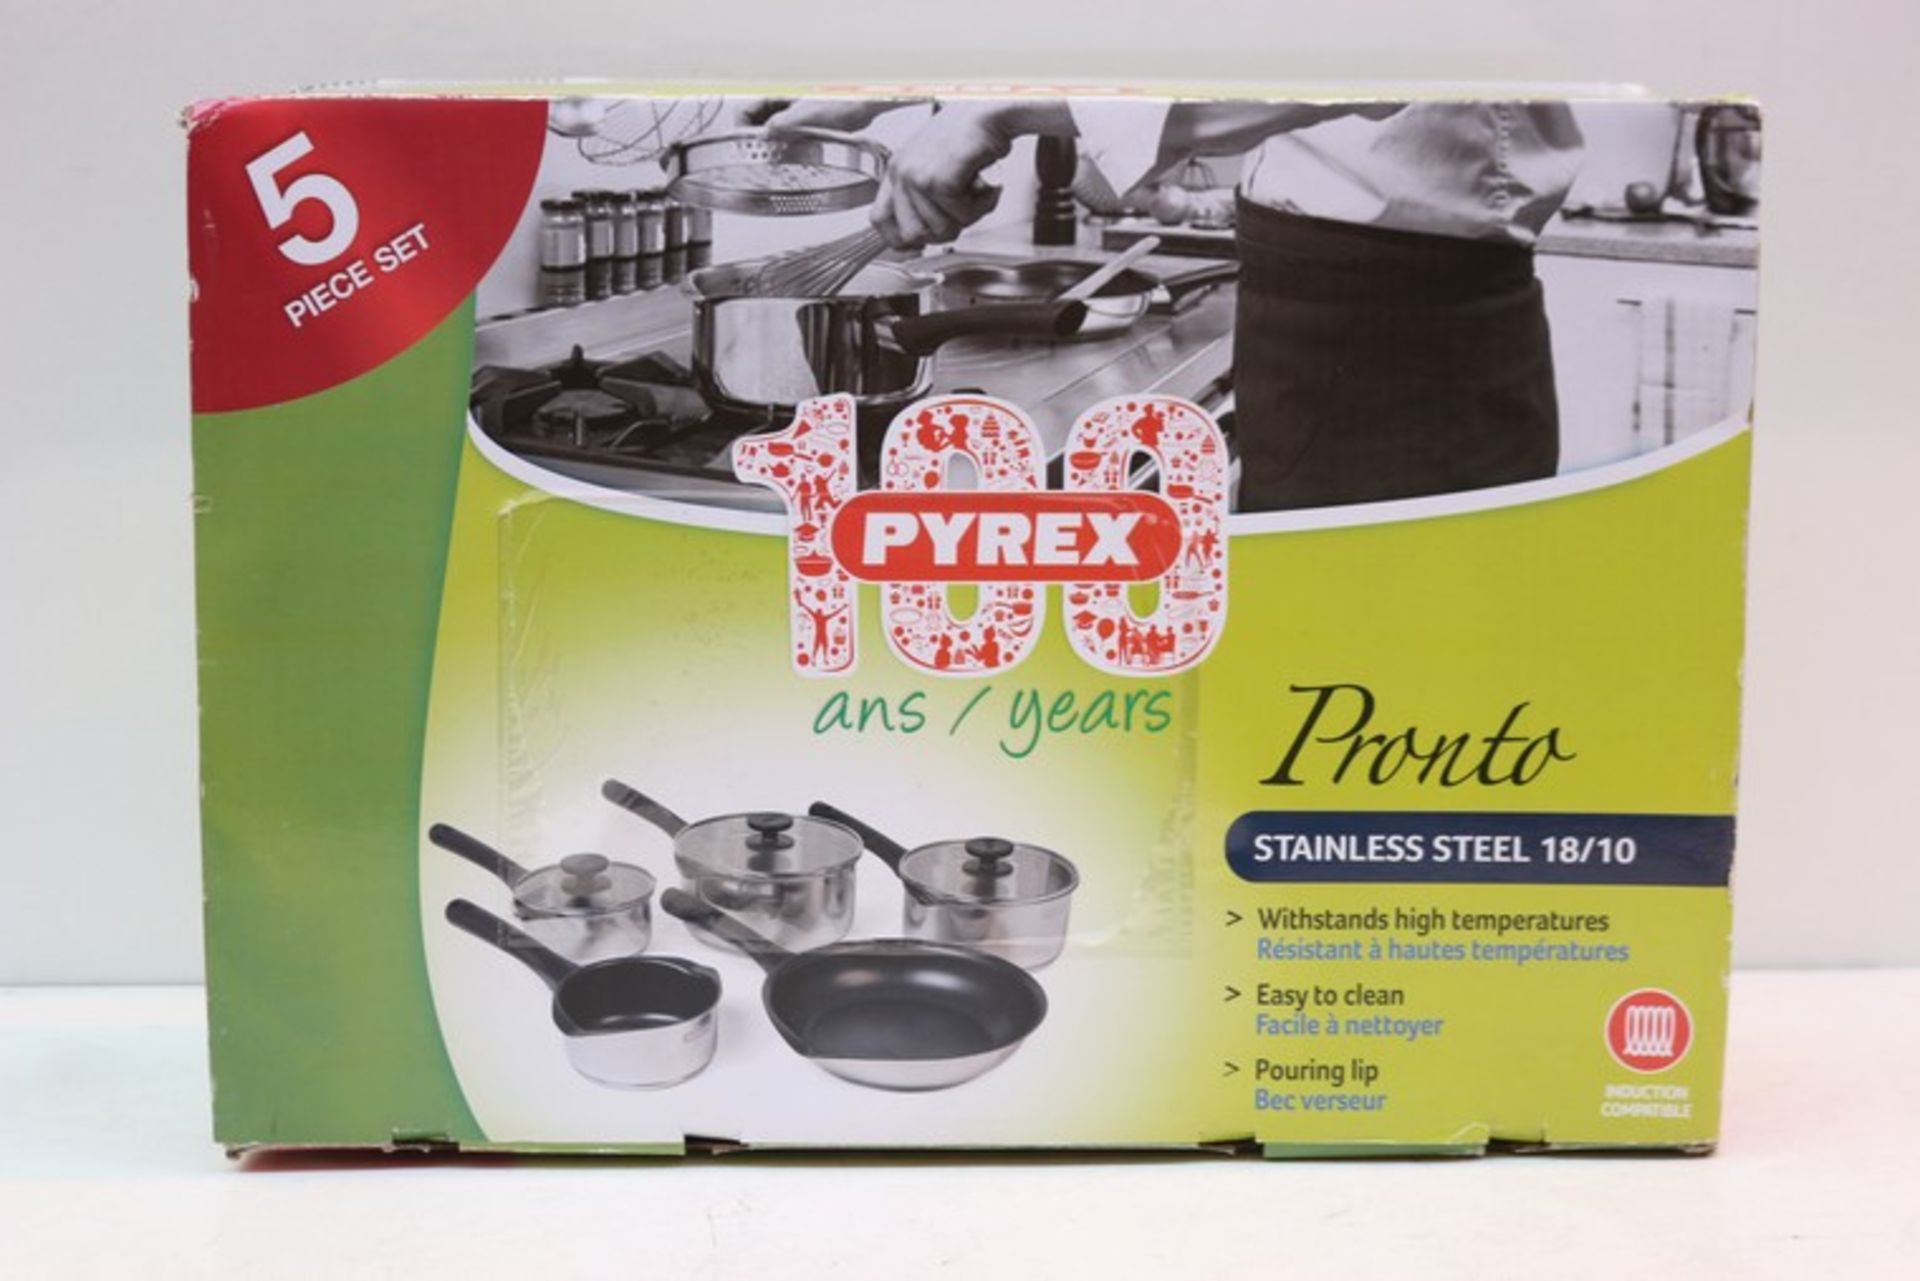 1 x BOXED PYREX 5 PIECE PAN SET RRP £100 (17.5.17) *PLEASE NOTE THAT THE BID PRICE IS MULTIPLIED